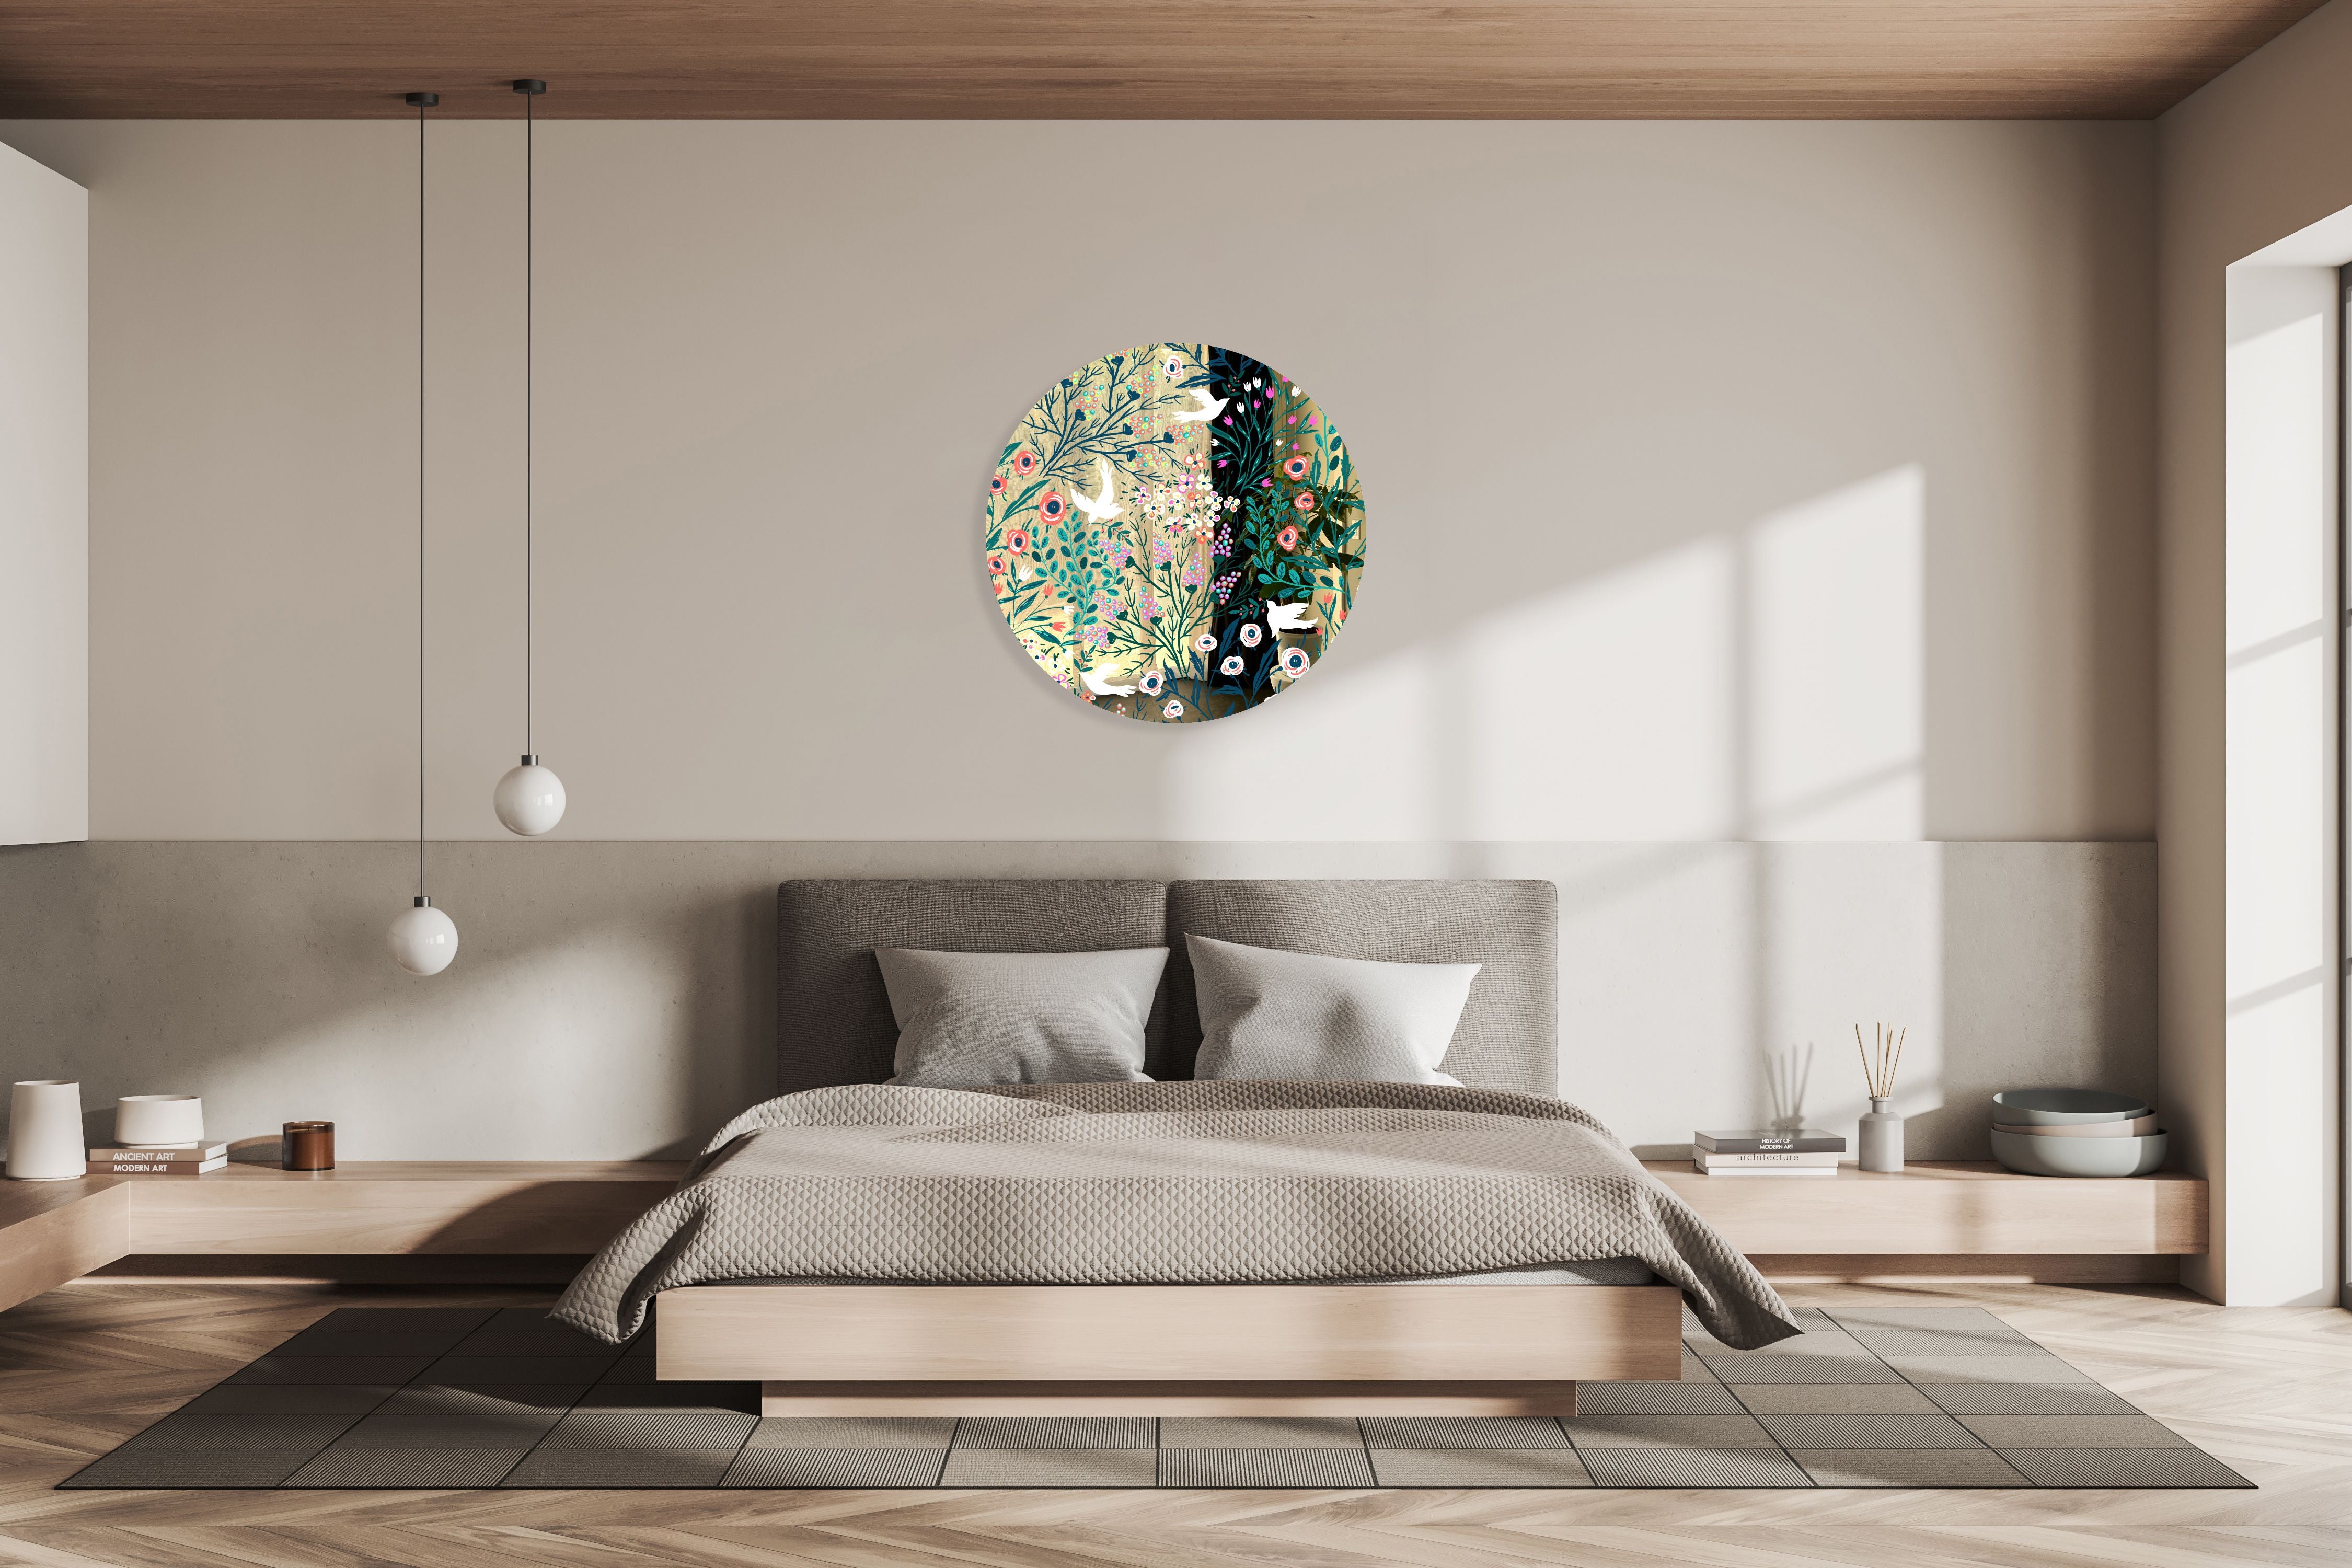 Doves and Flowers Printed Mirror Acrylic Circles –